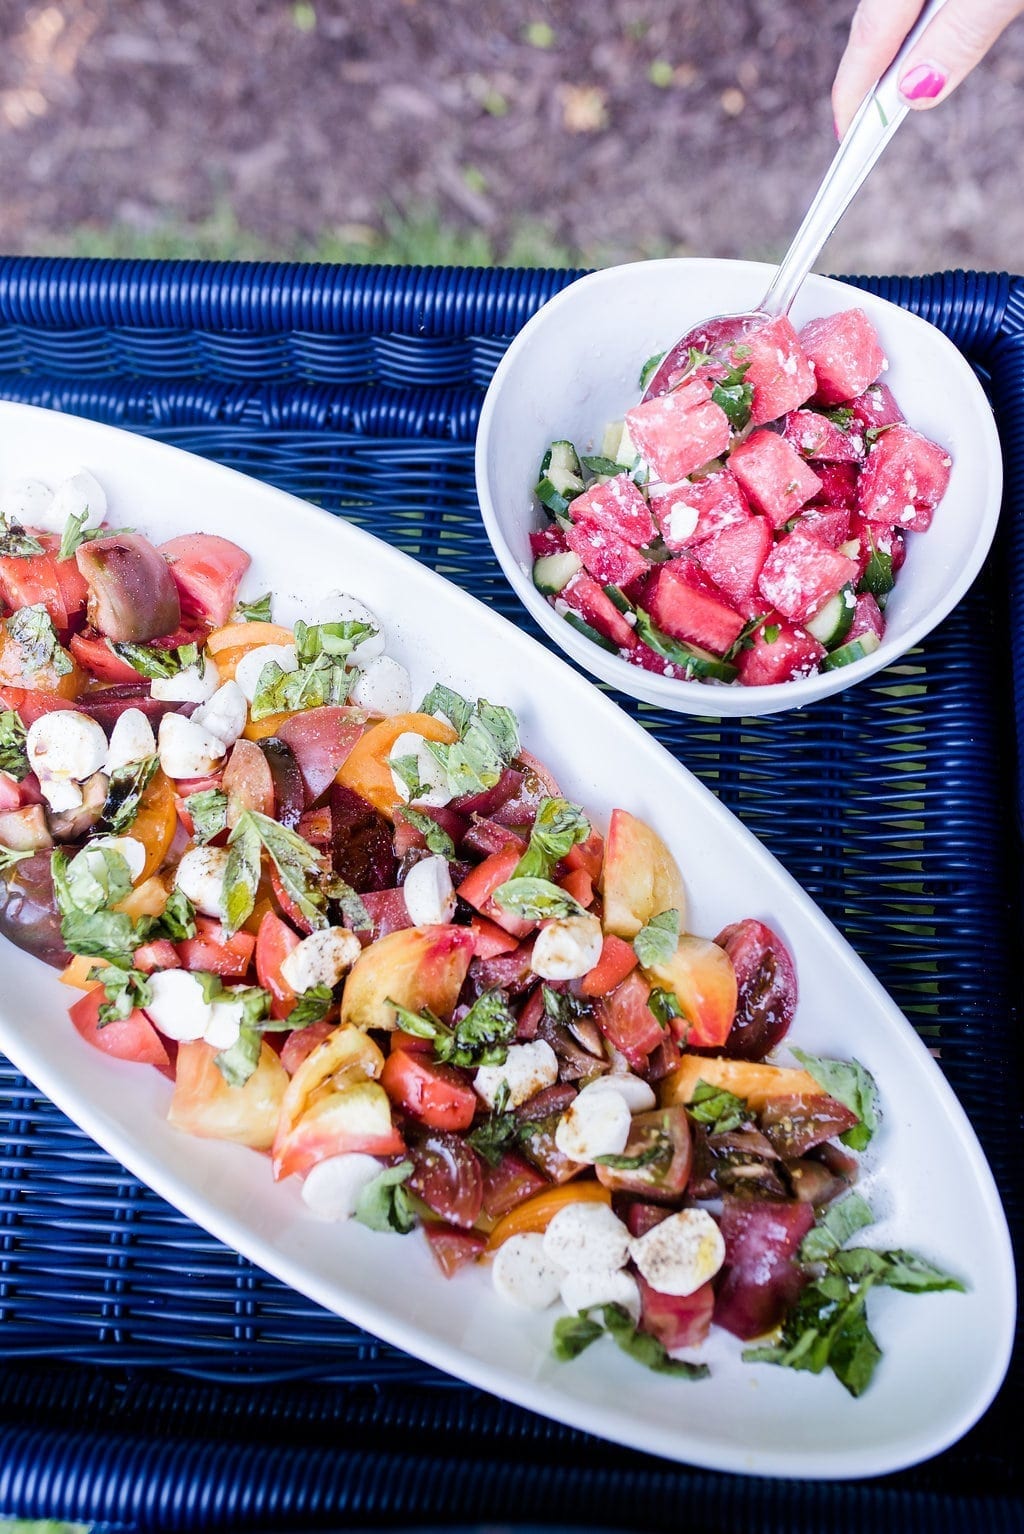 Watermelon and feta side dish. Cold side dish for outdoor entertaining.